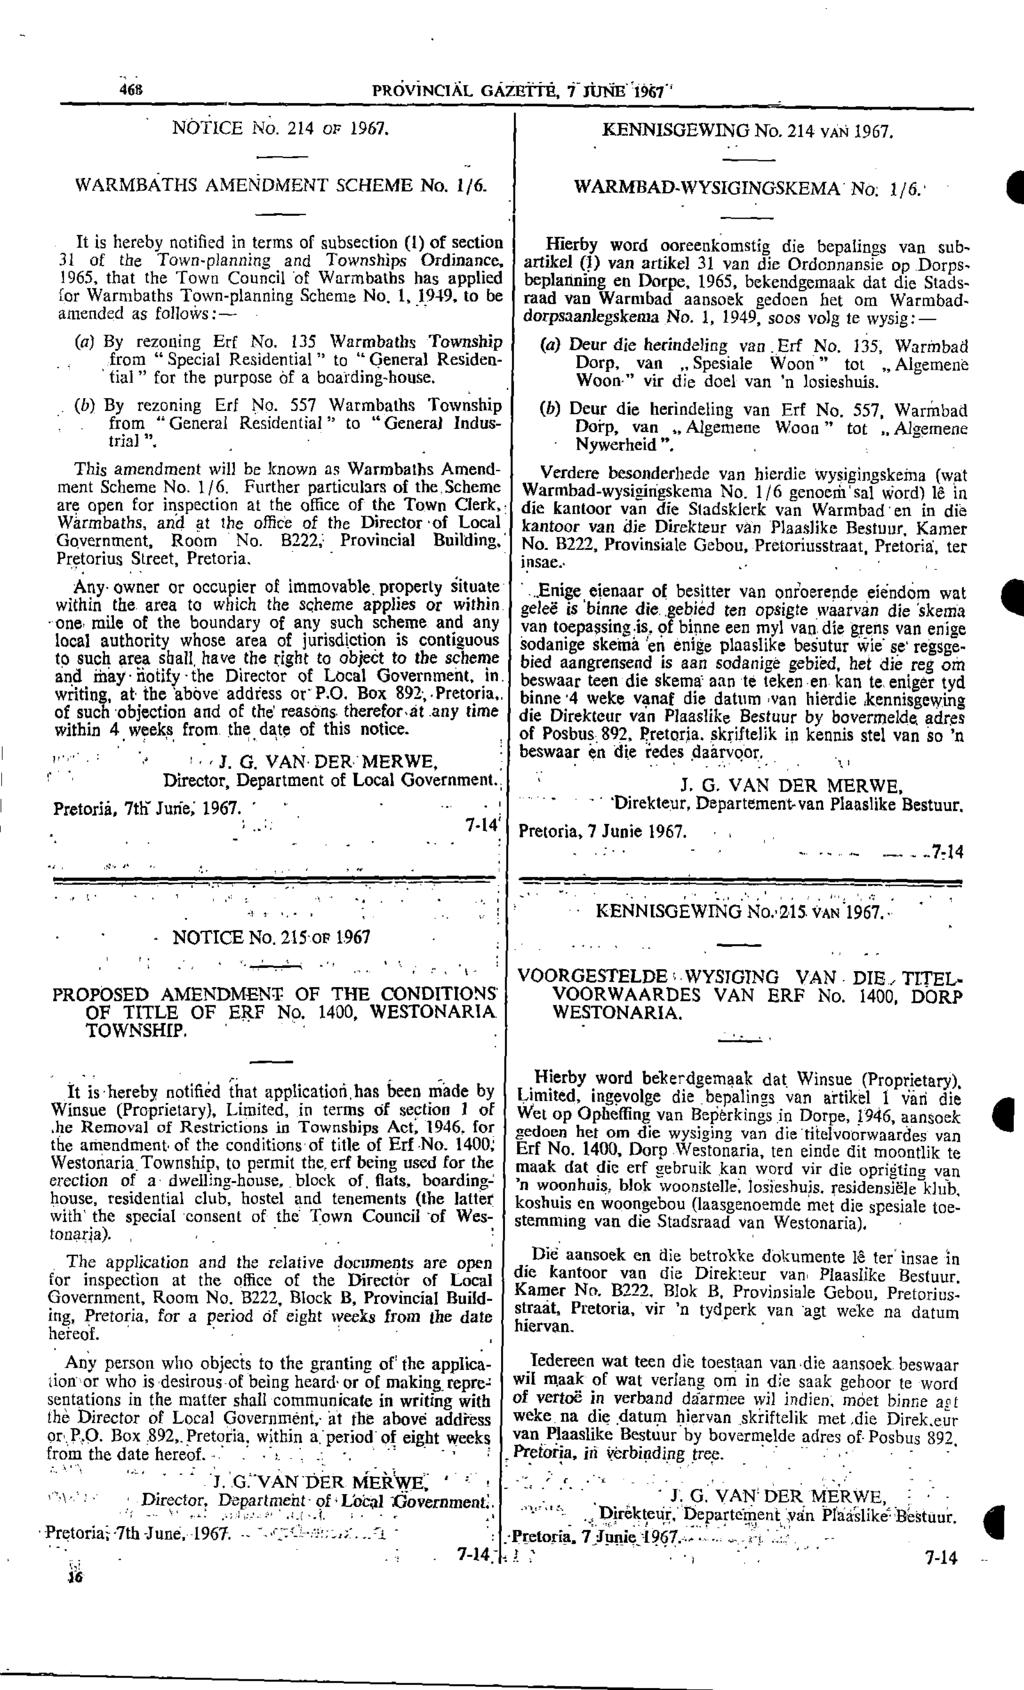 463 PROVNCAL GAZETTE 7 JUNE 967 NOTCE No 24 OF 967 KENNSGEWNG No 24 VA/967 WARMBATHS AMENDMENT SCHEME No /6 WARMBAD WYSGNGSKEMA No: / 6 4 t is hereby notified in terms of subsection () of section